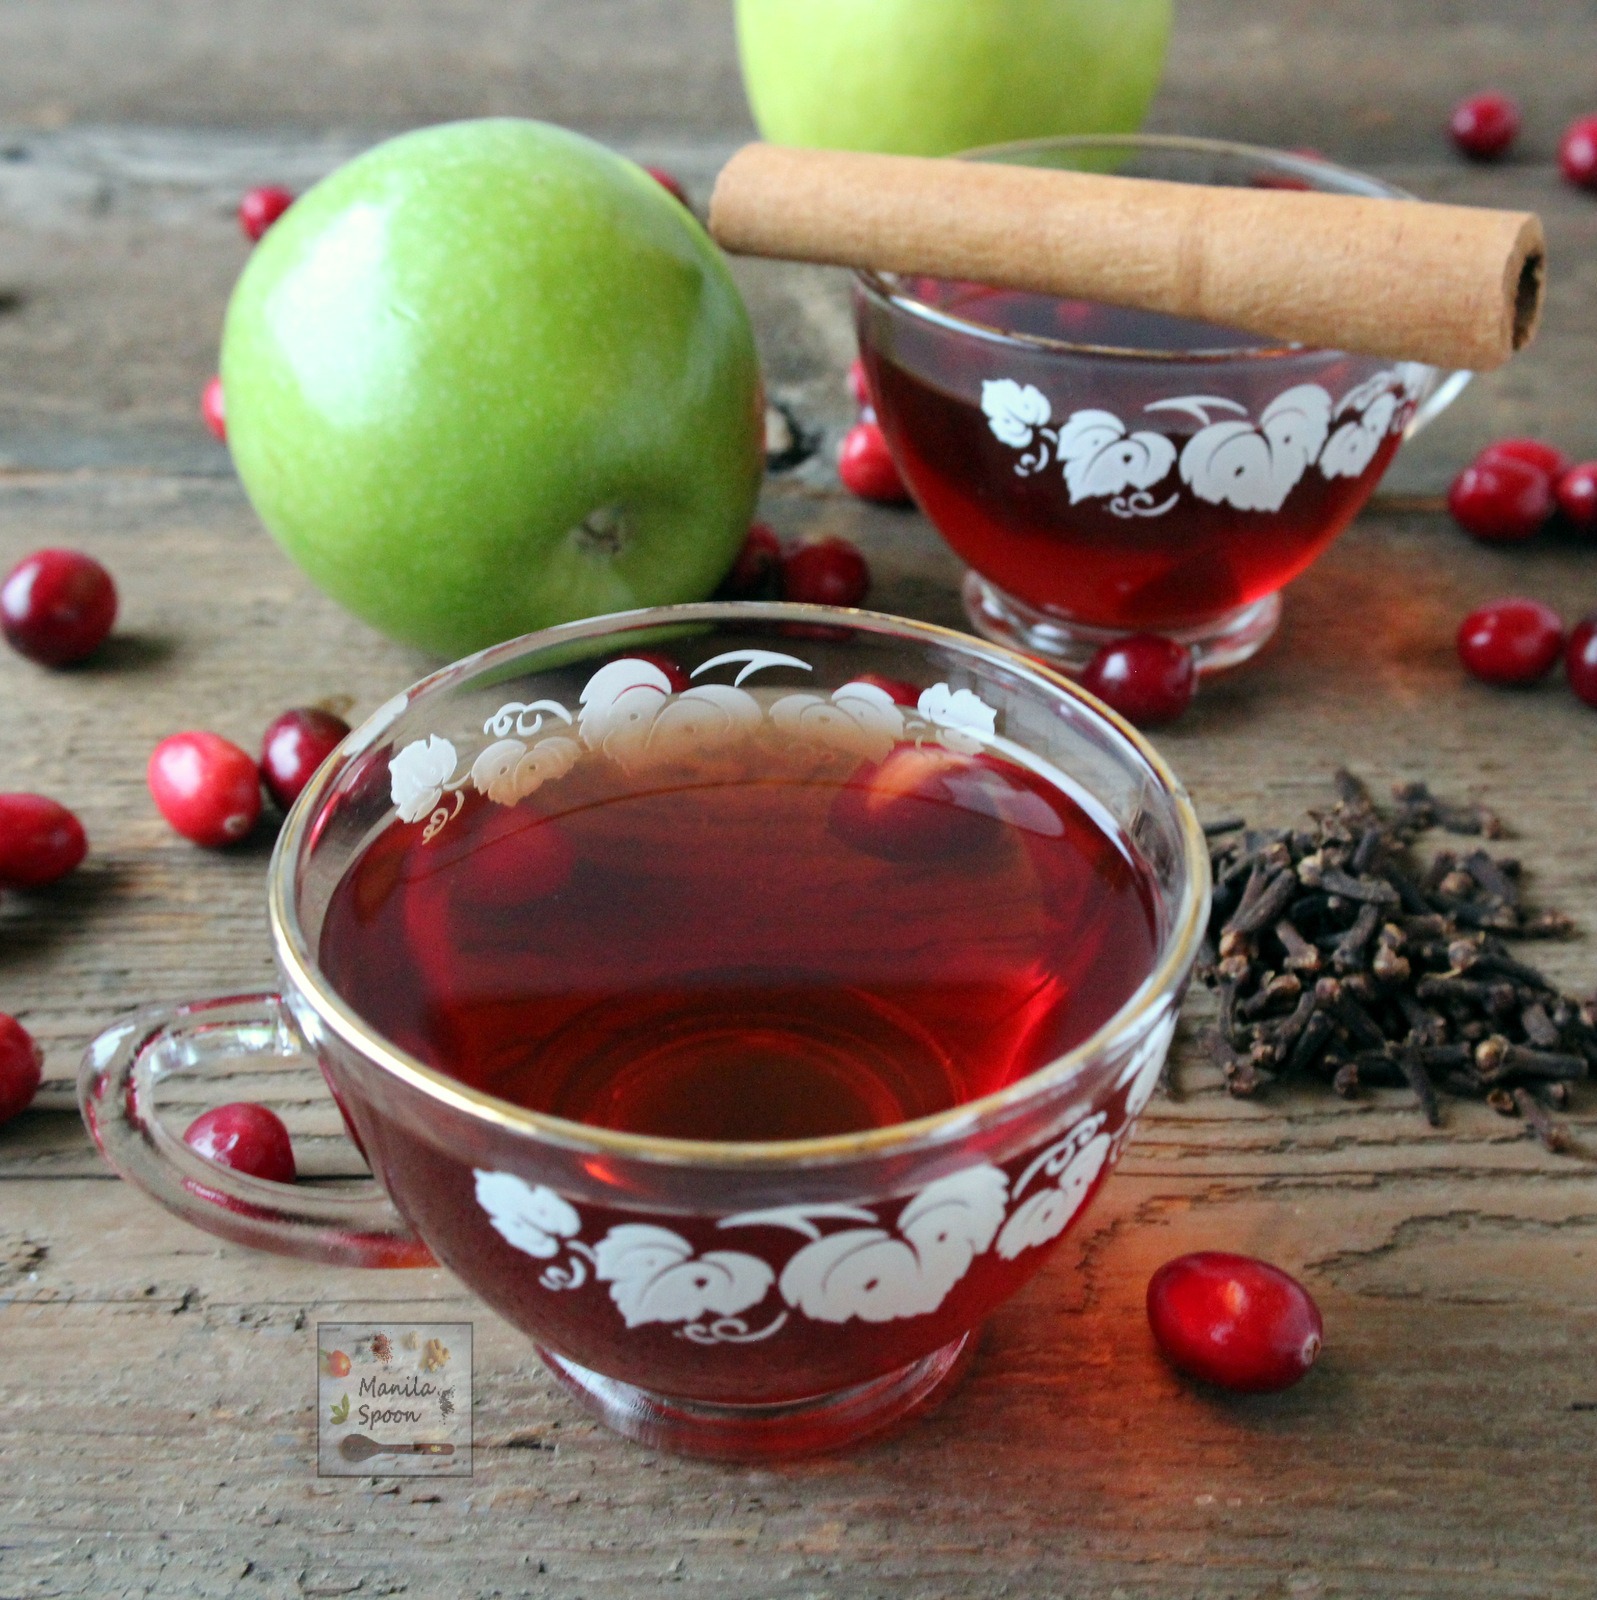 A deliciously spiced fruity cider with a mix of apple and cranberry juices and made in the slow cooker for ease and convenience. Family friendly and party-perfect! | manilaspoon.com